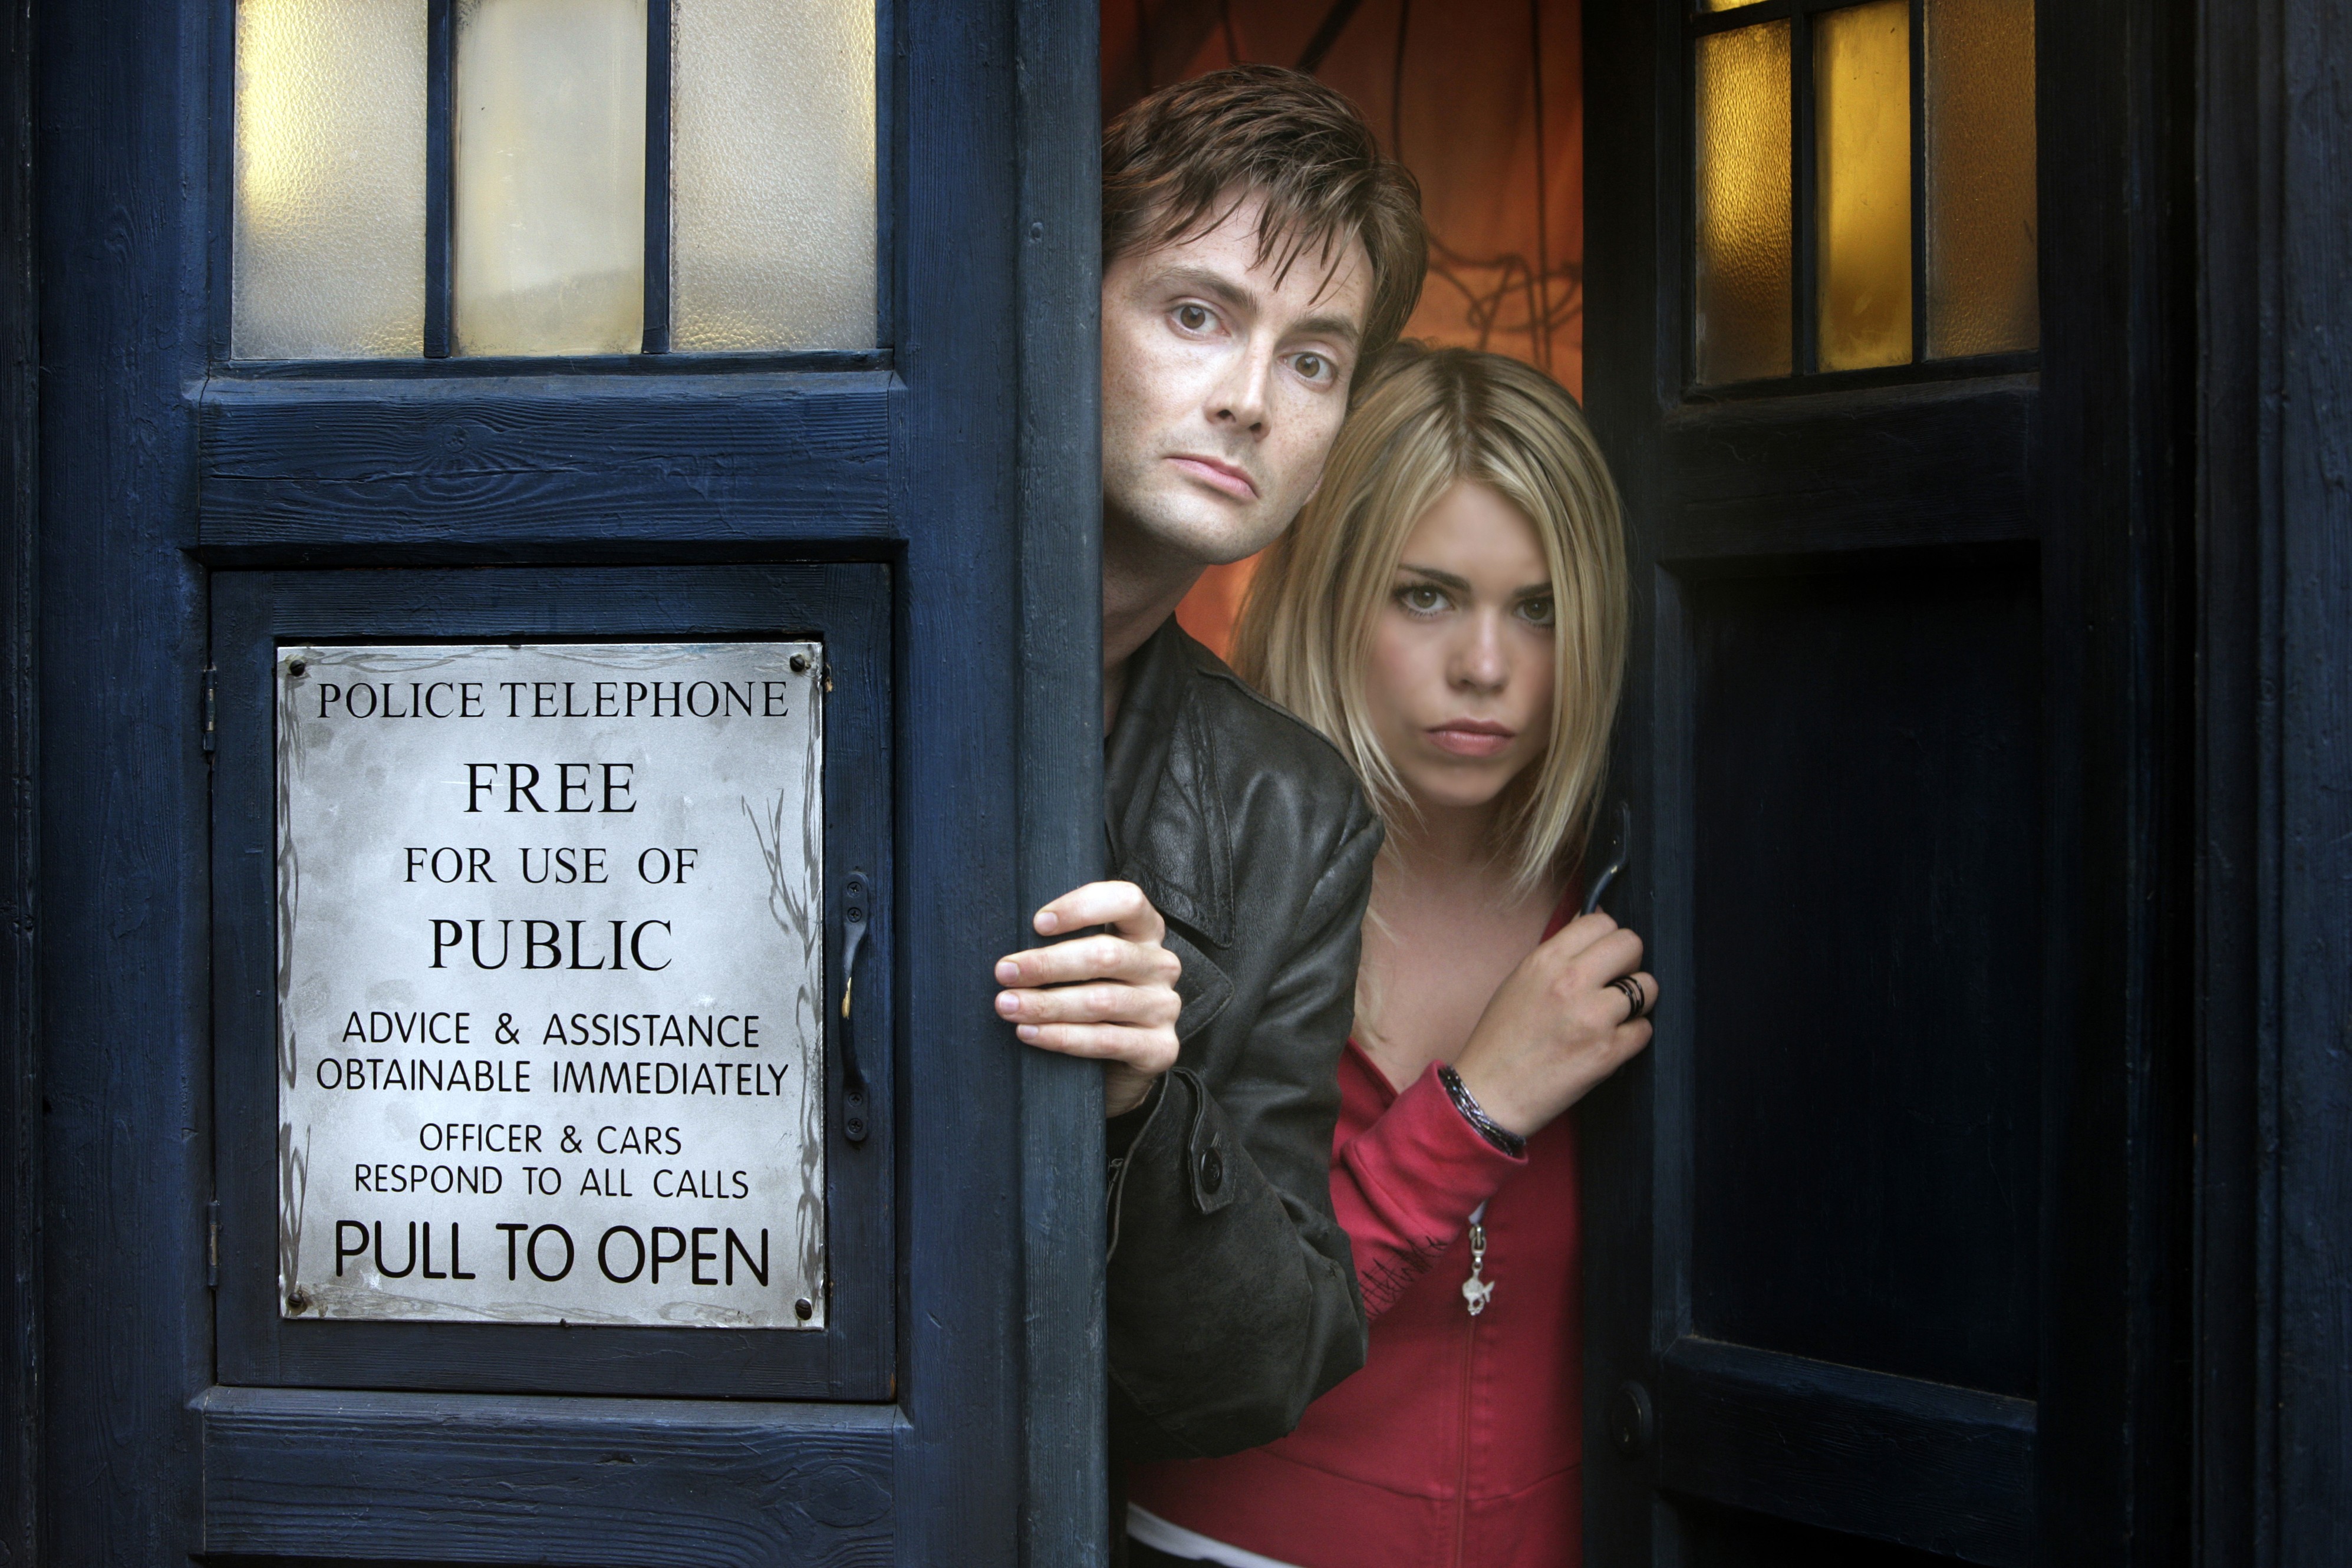 Doctor Who David Tennant And Billie Piper - HD Wallpaper 